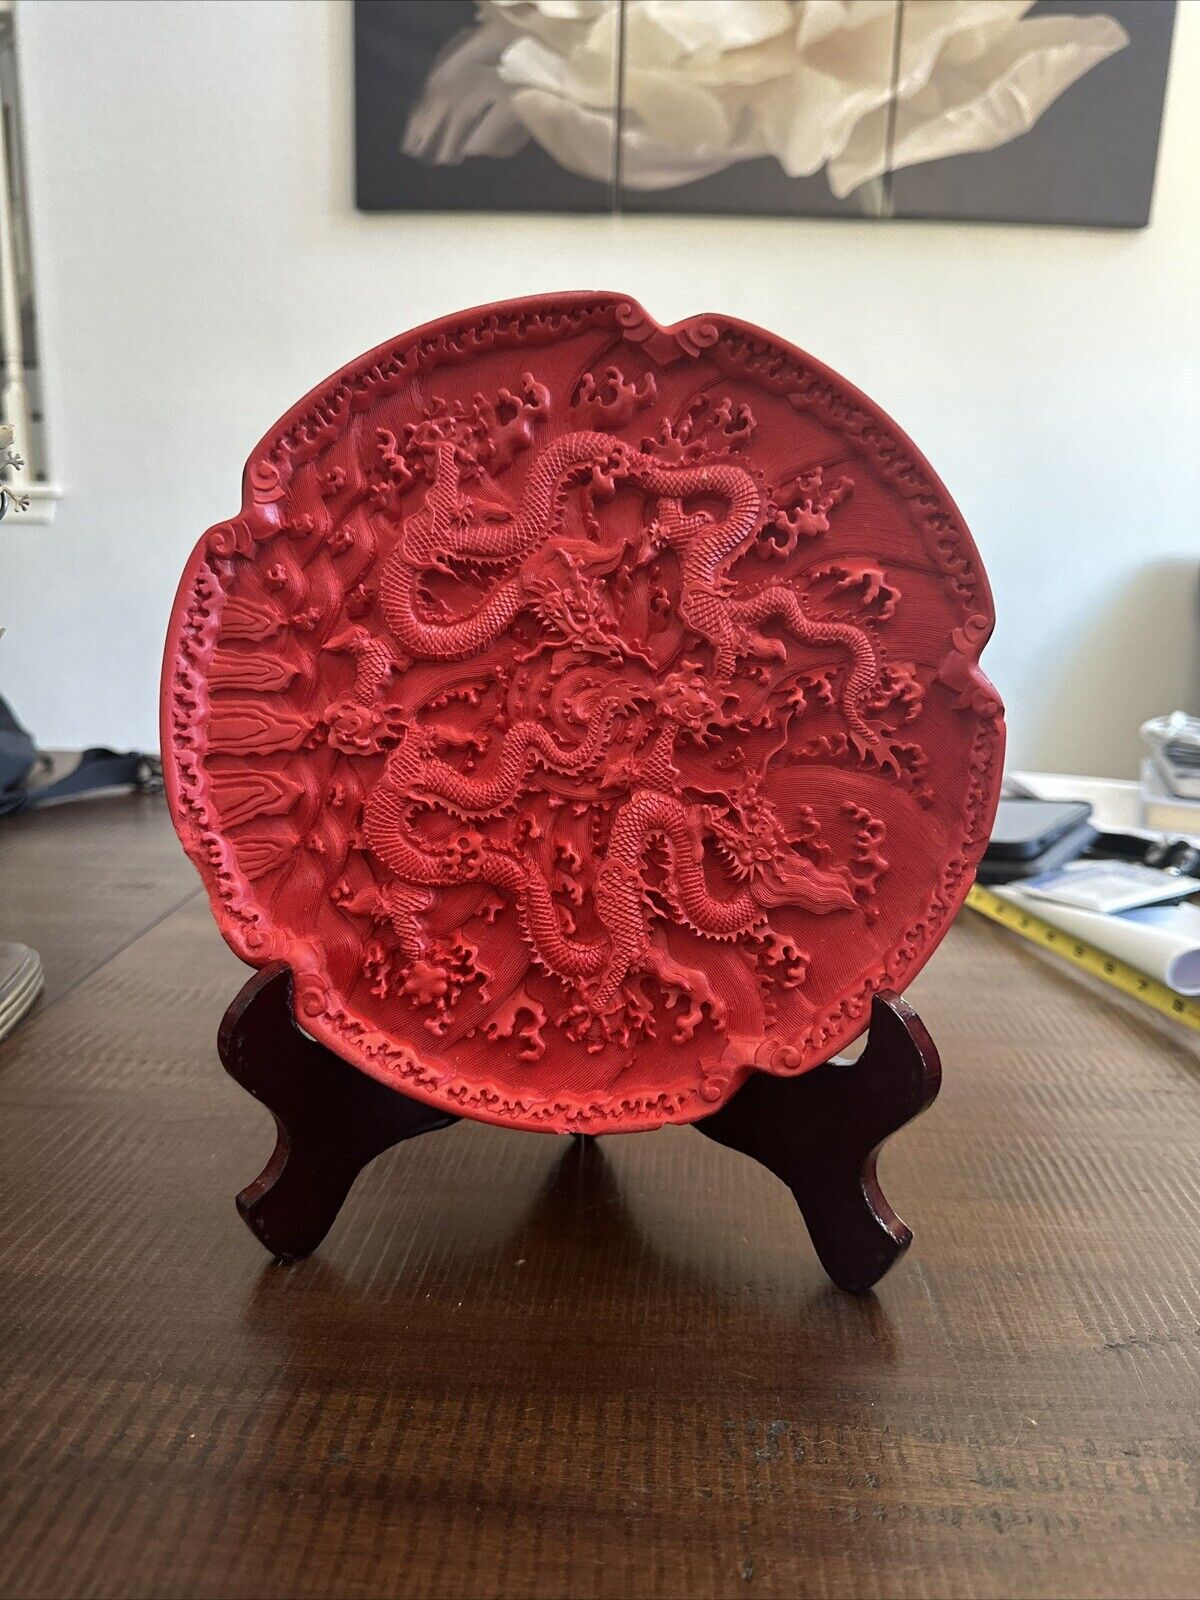 Plate Art Stunning 9.5” China Carved Lacquerware Red  Dragon Plate